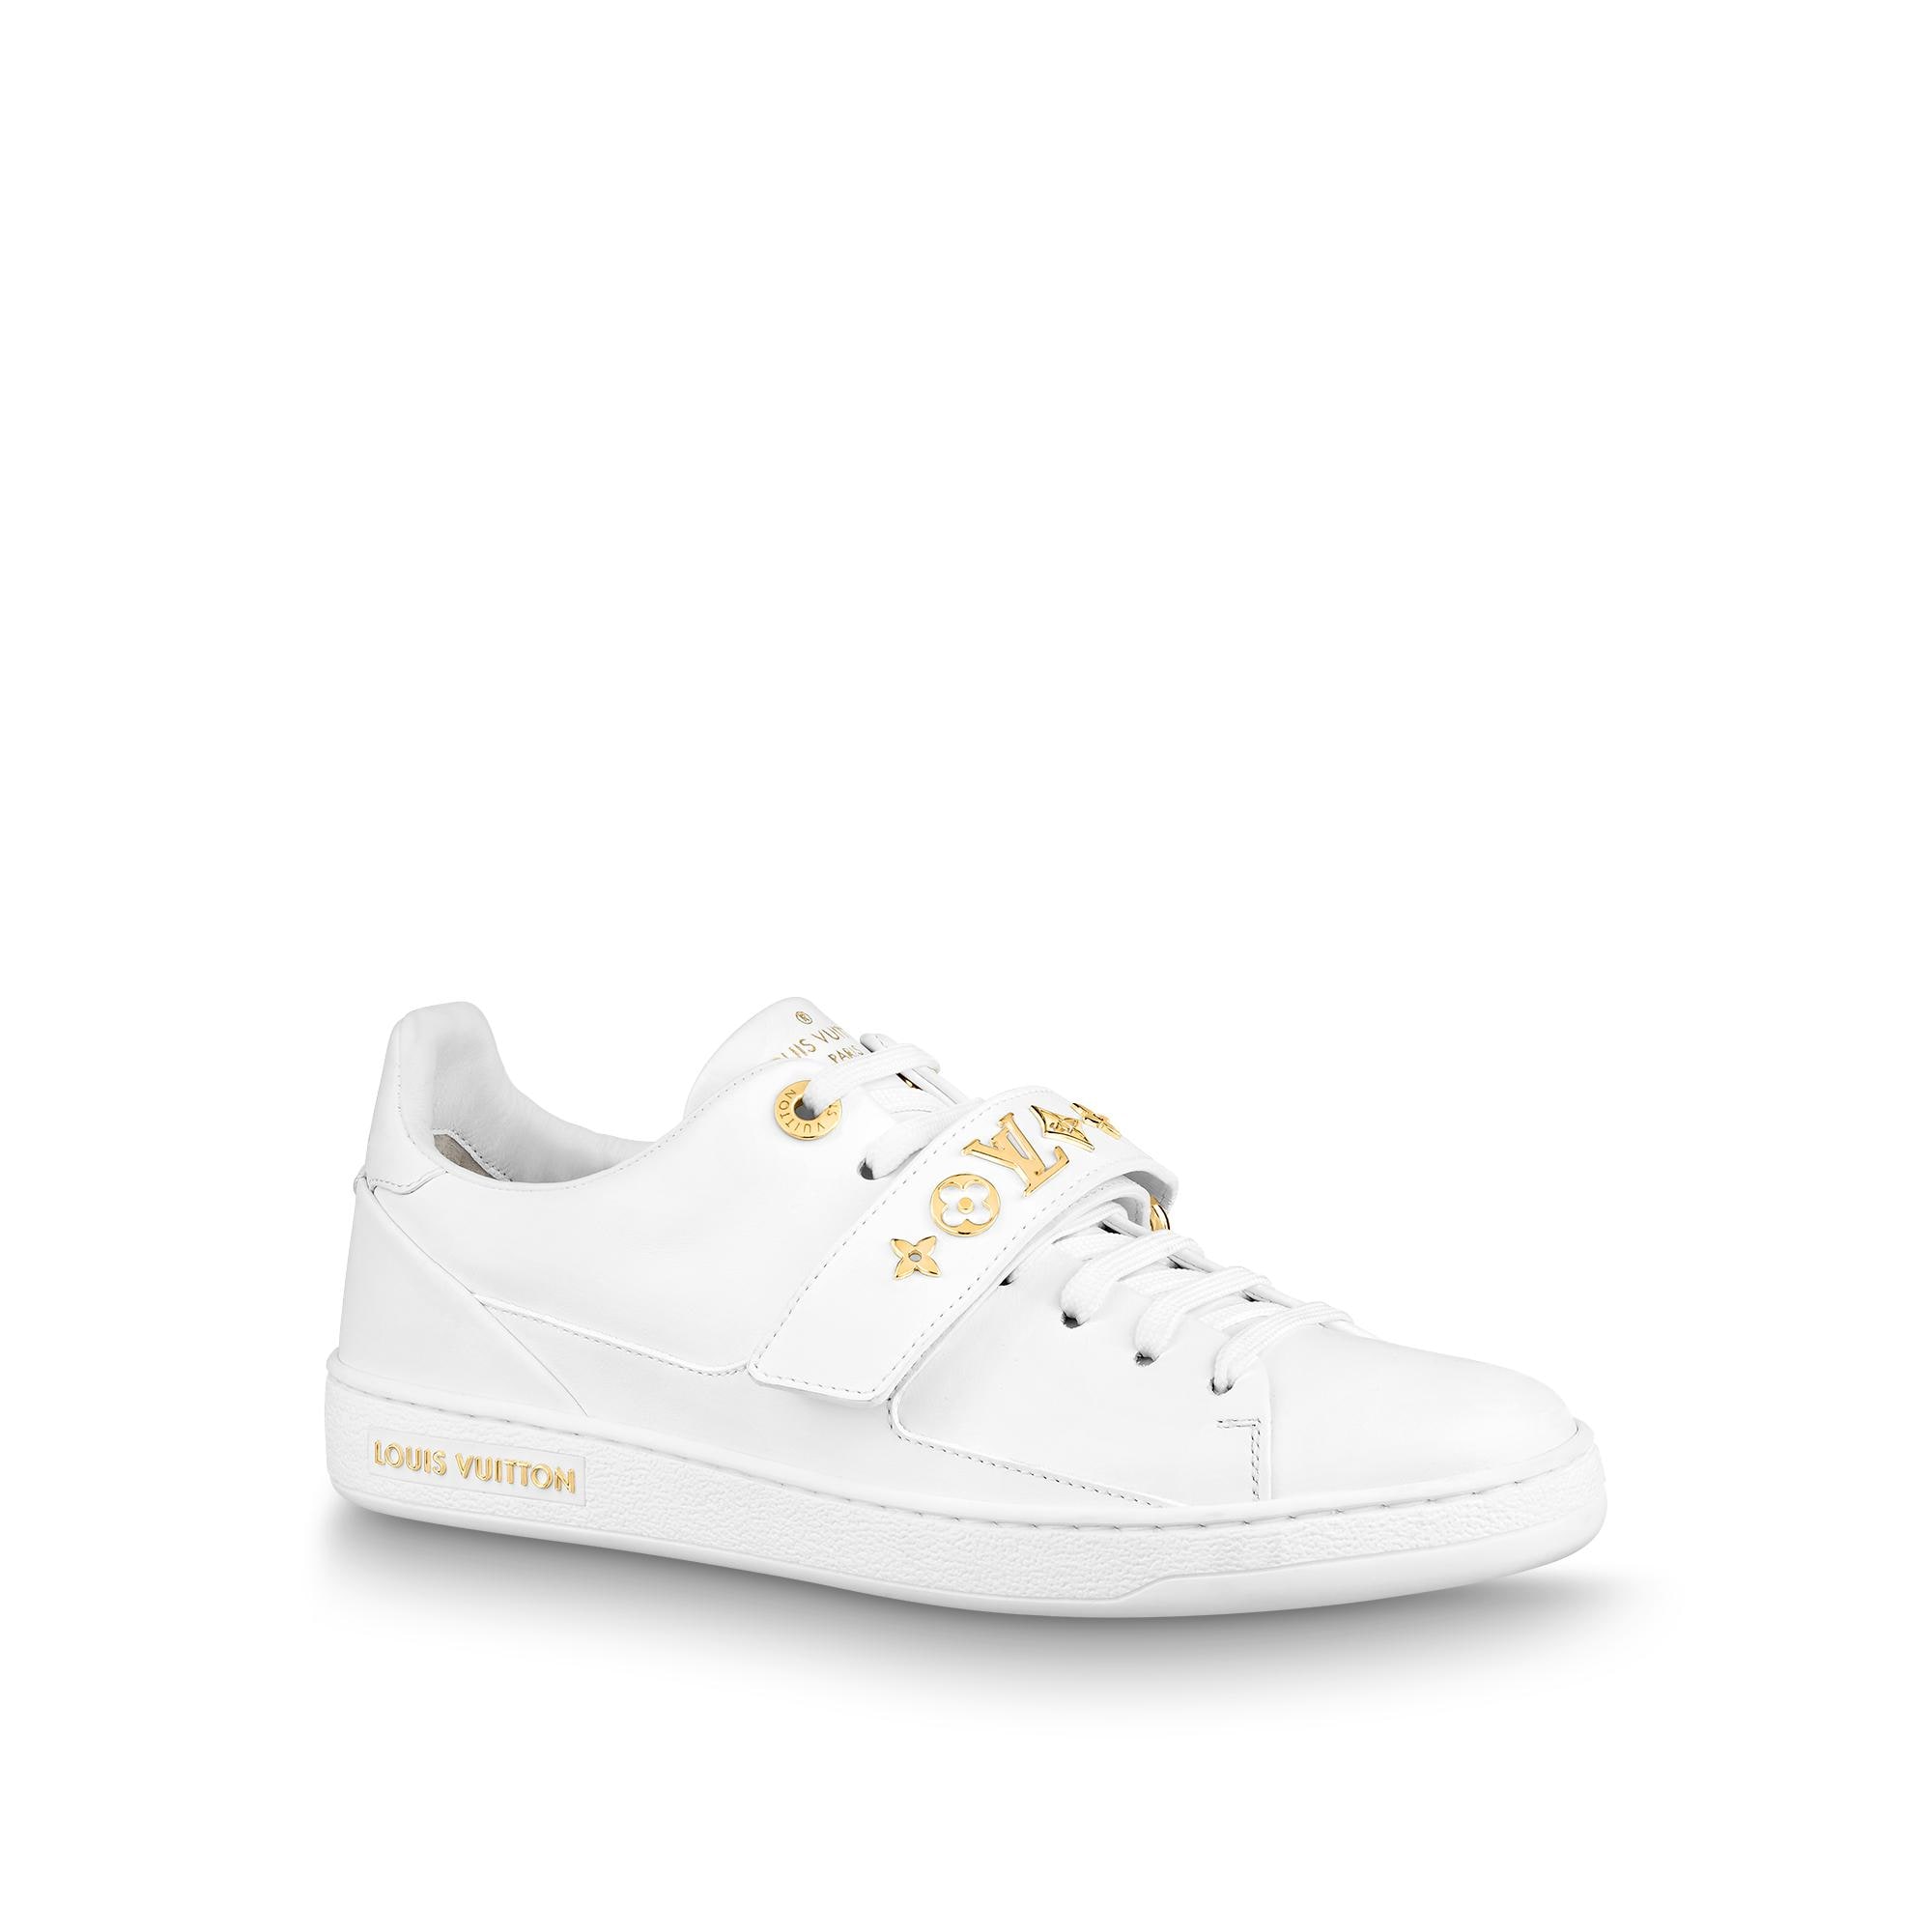 Louis Vuitton Frontrow Sneaker in White - Shoes 1A95Q1 - $123.50 